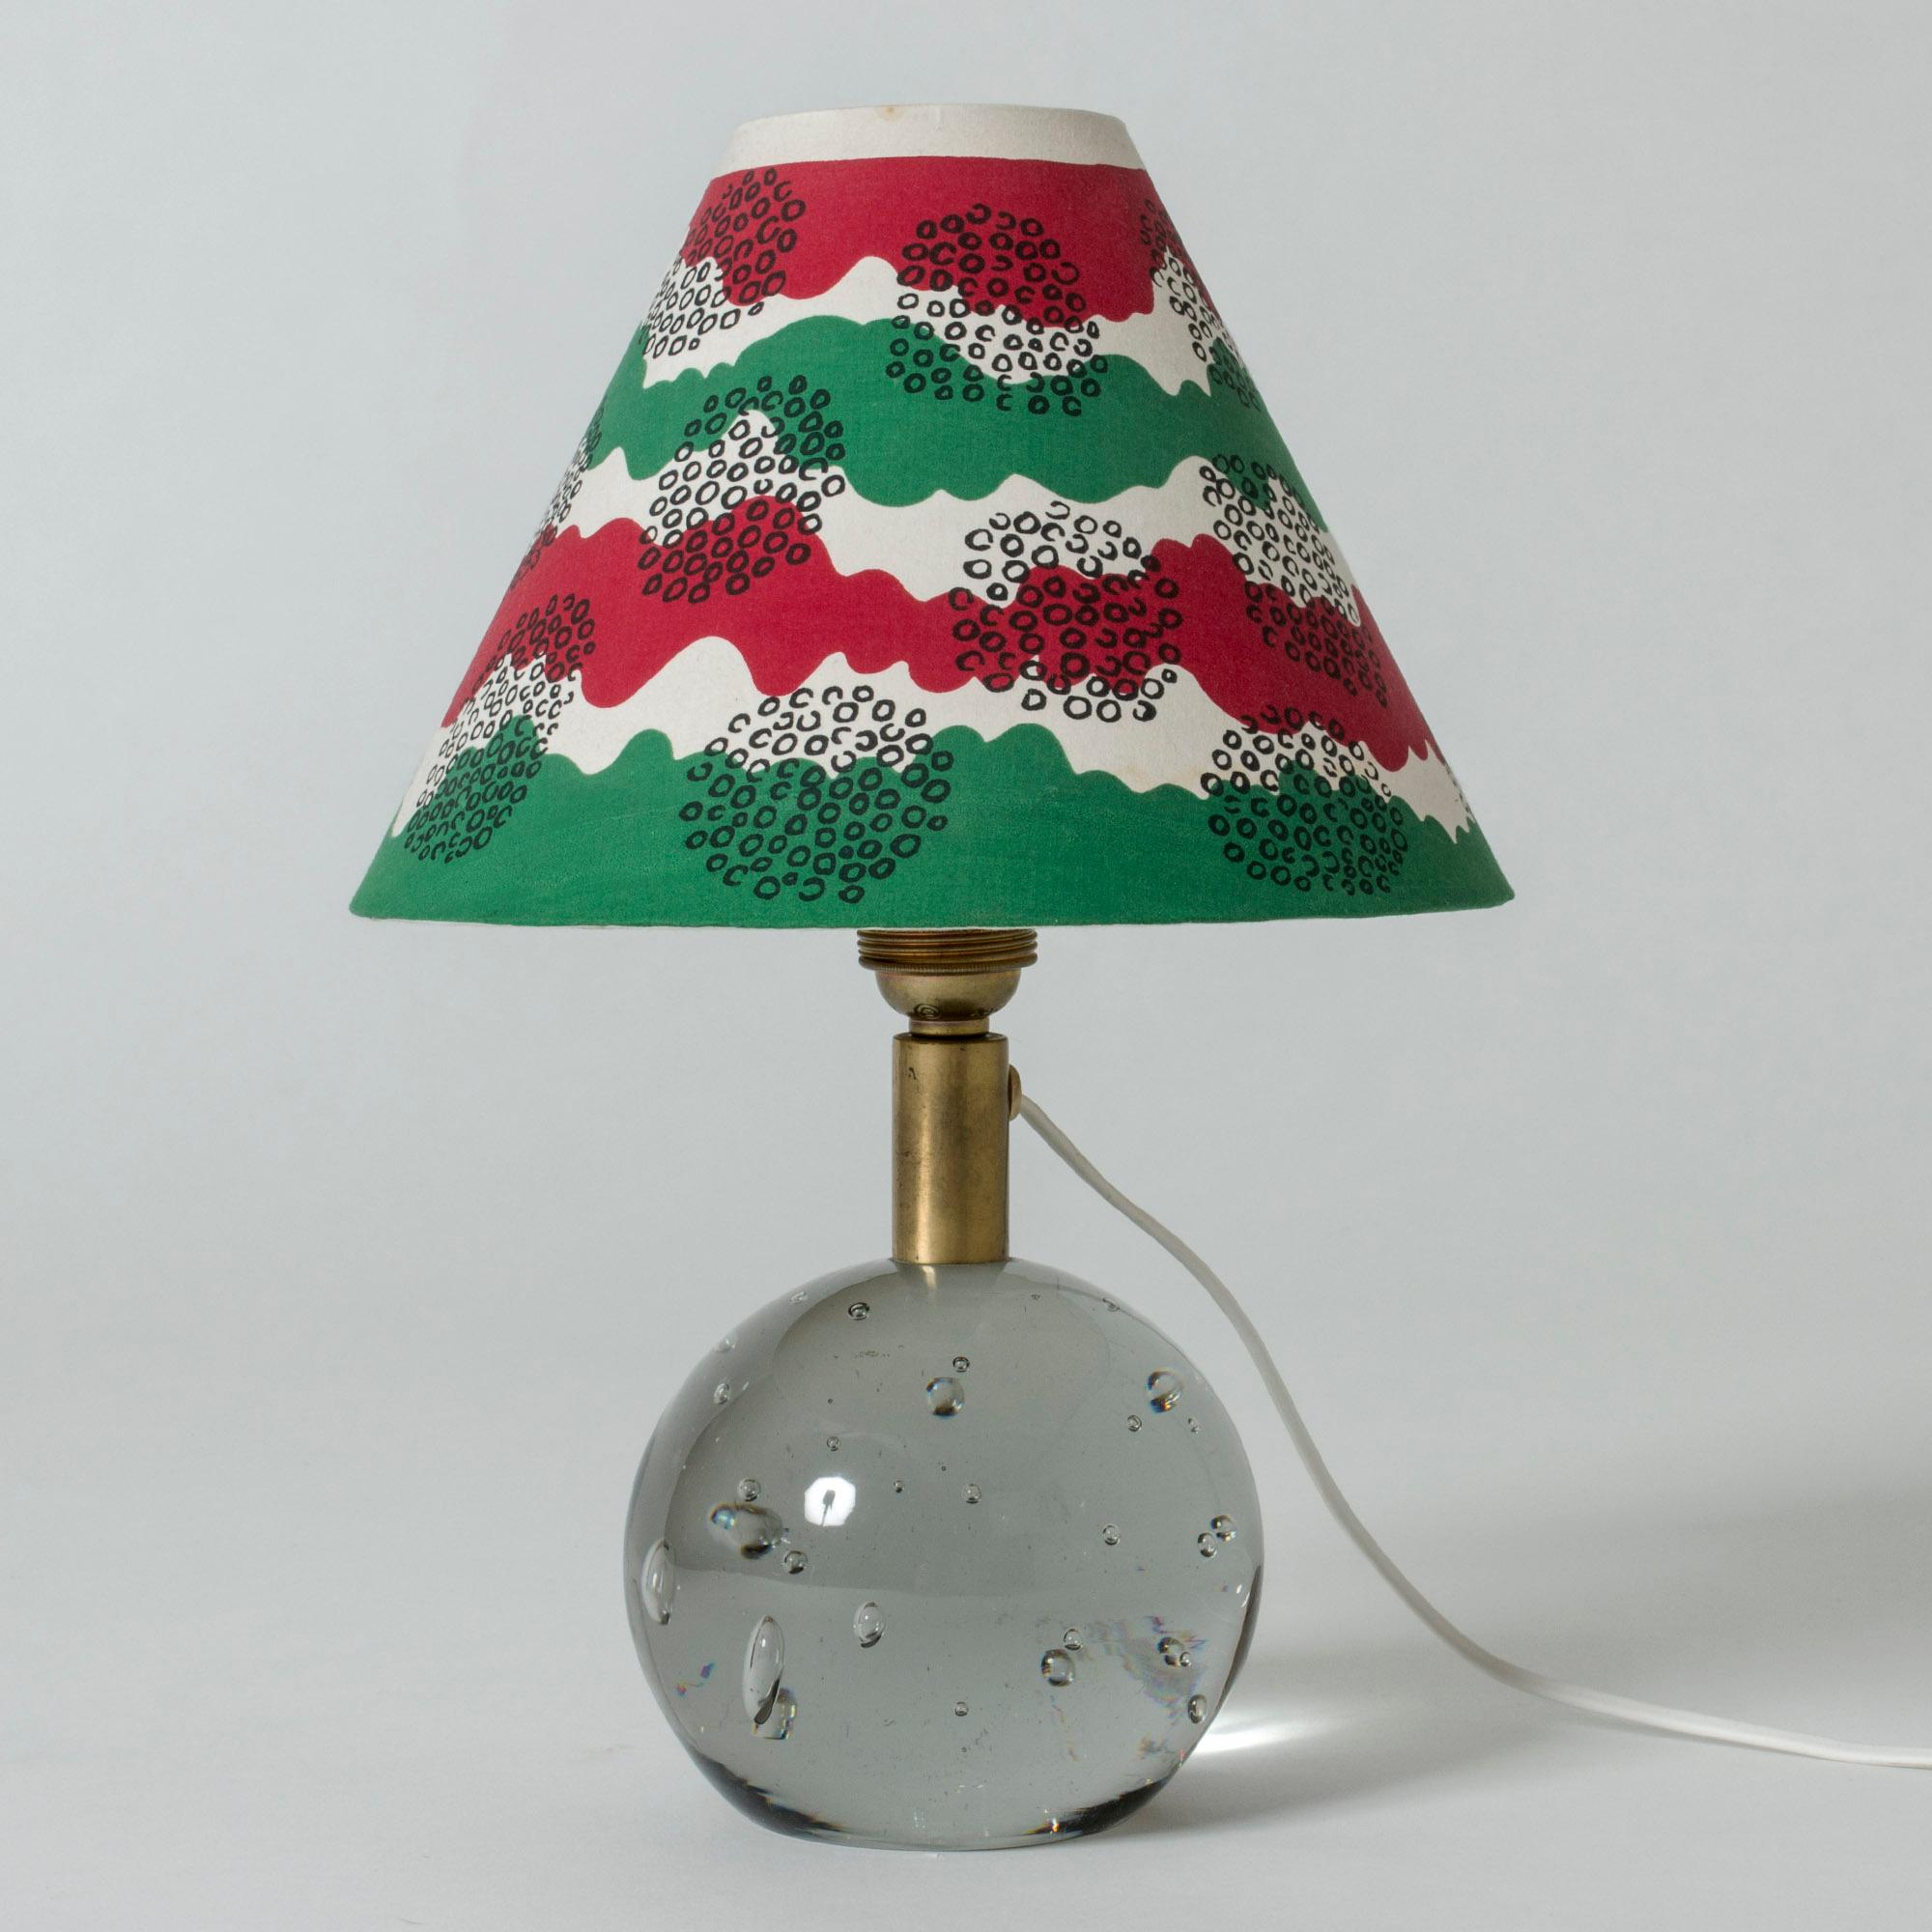 Rare, early table lamp modell 1819 by Josef Frank, made from glass and brass. Weighty round glass base with bubbles caught inside. Colorful shade in green, red and white.